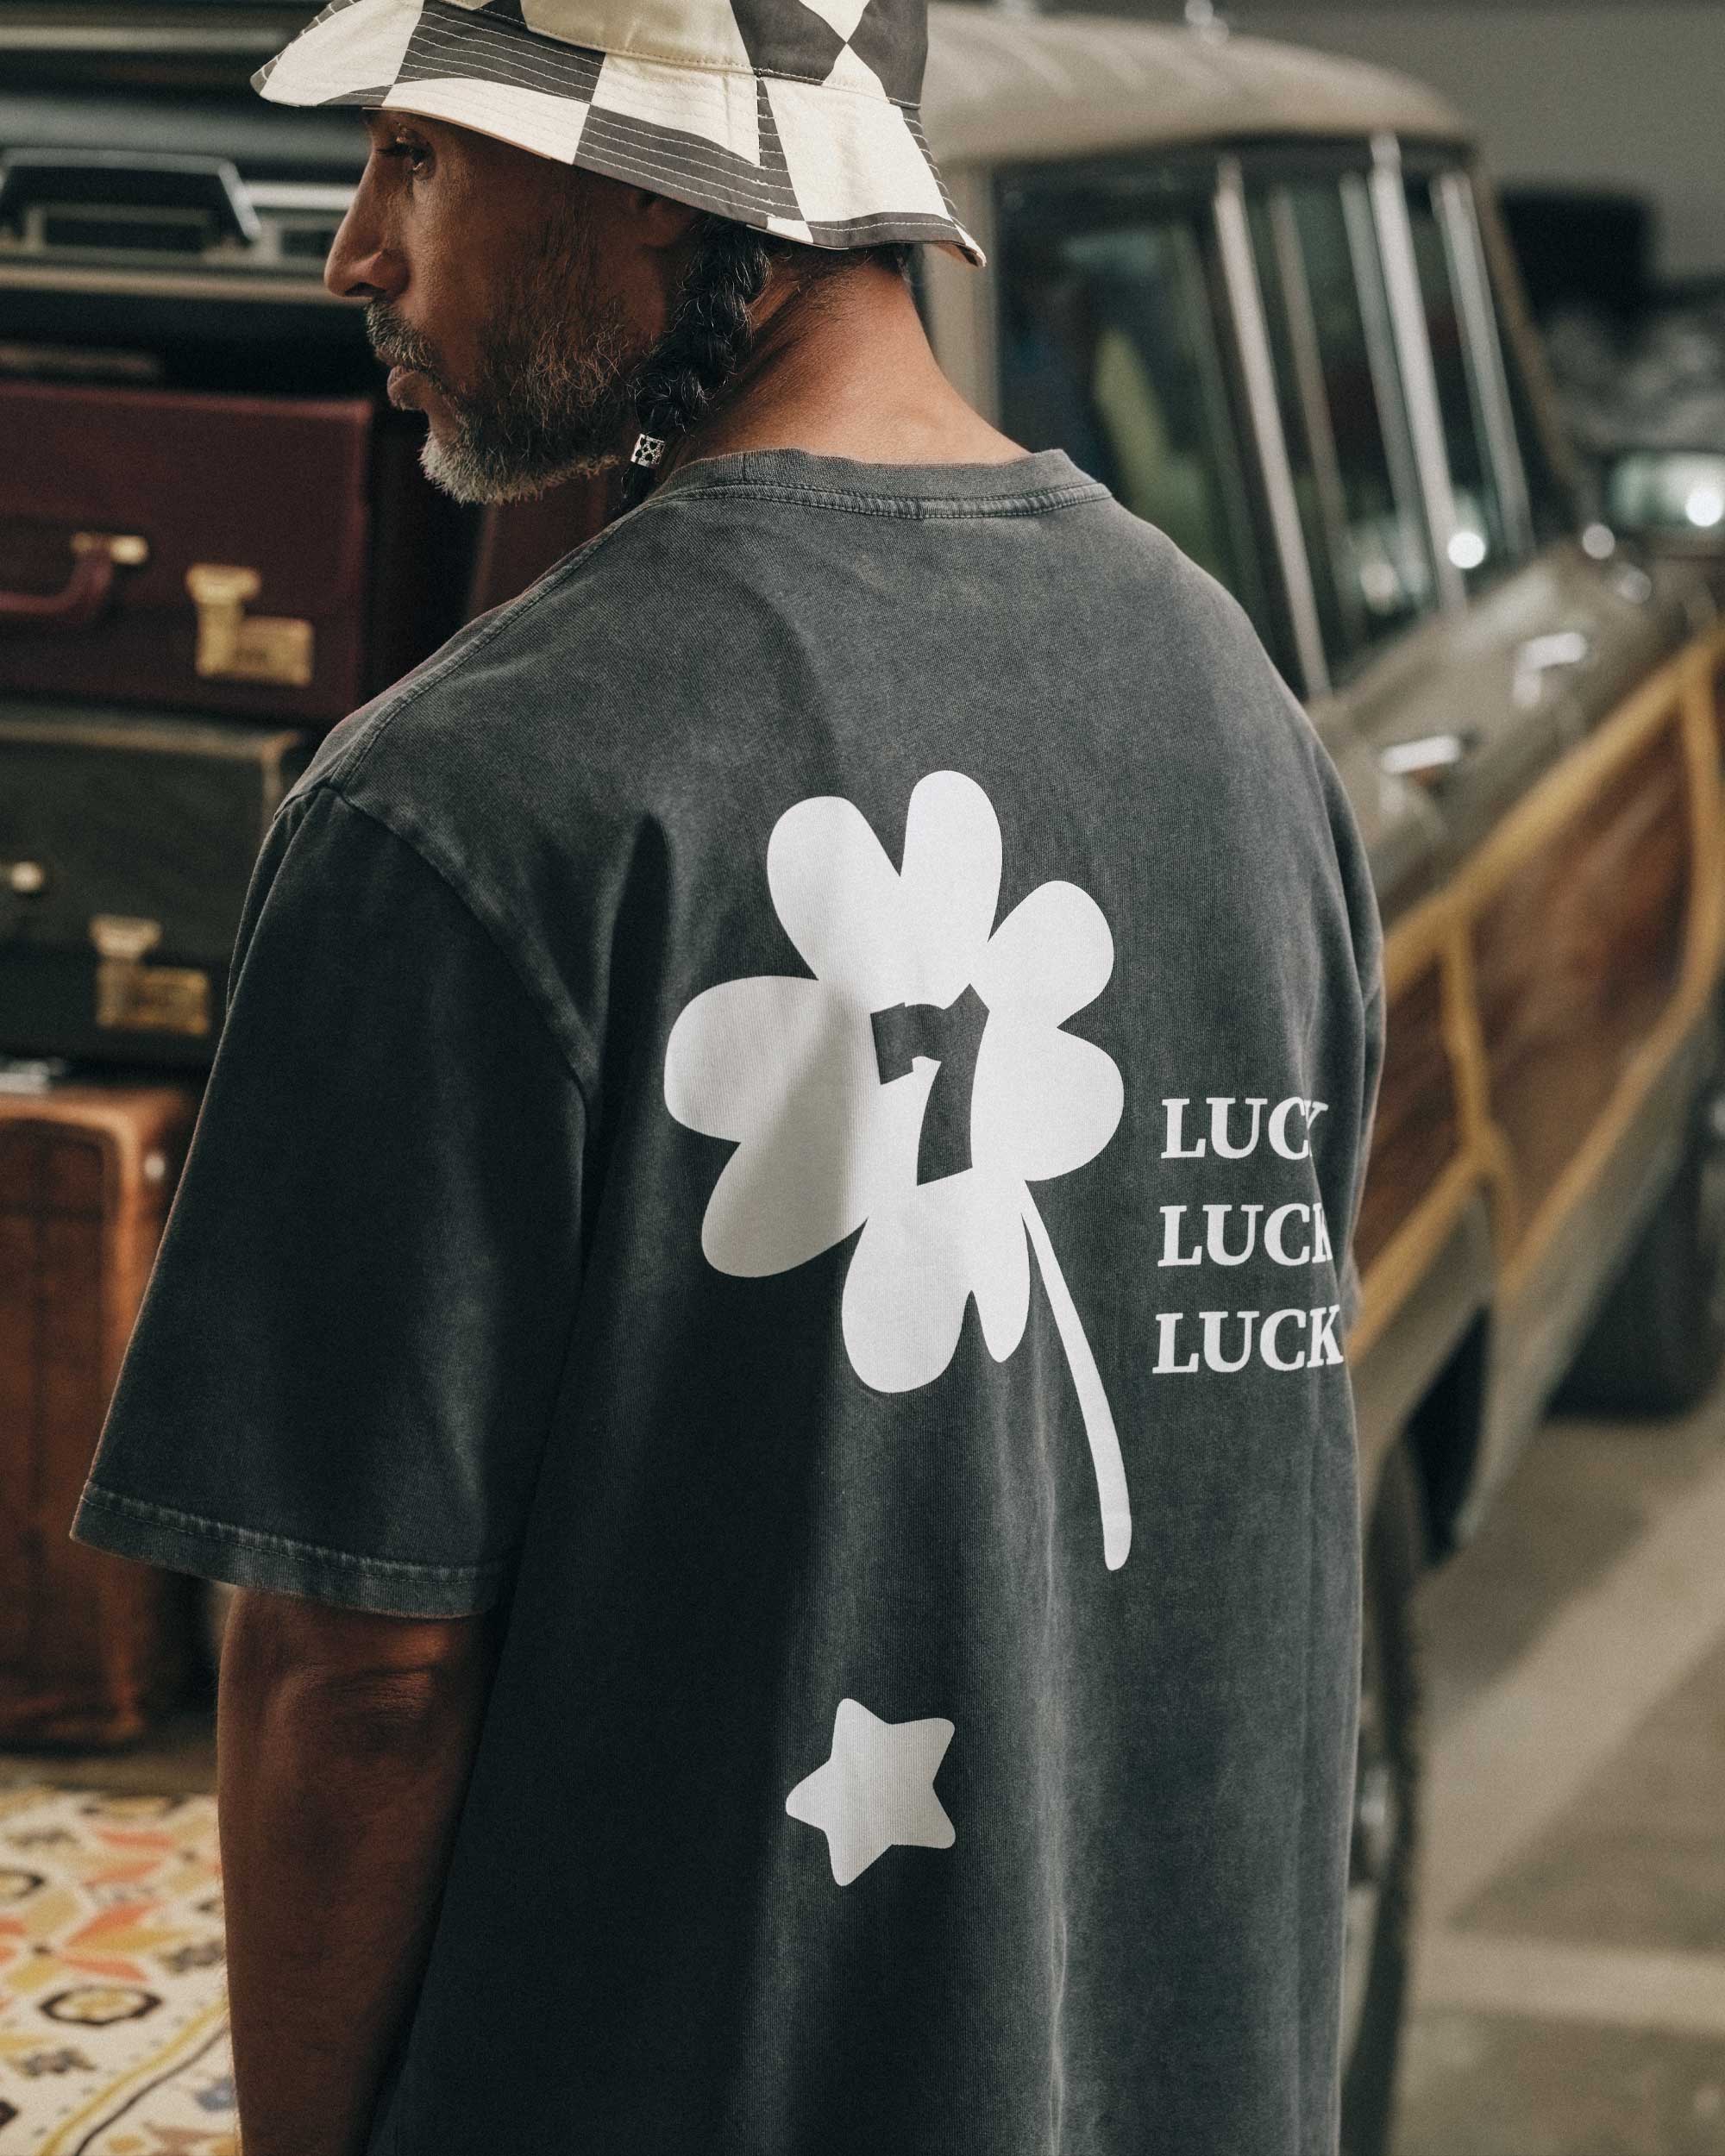 Back view of male model wearing a black t-shirt with white "Lucky" back print.